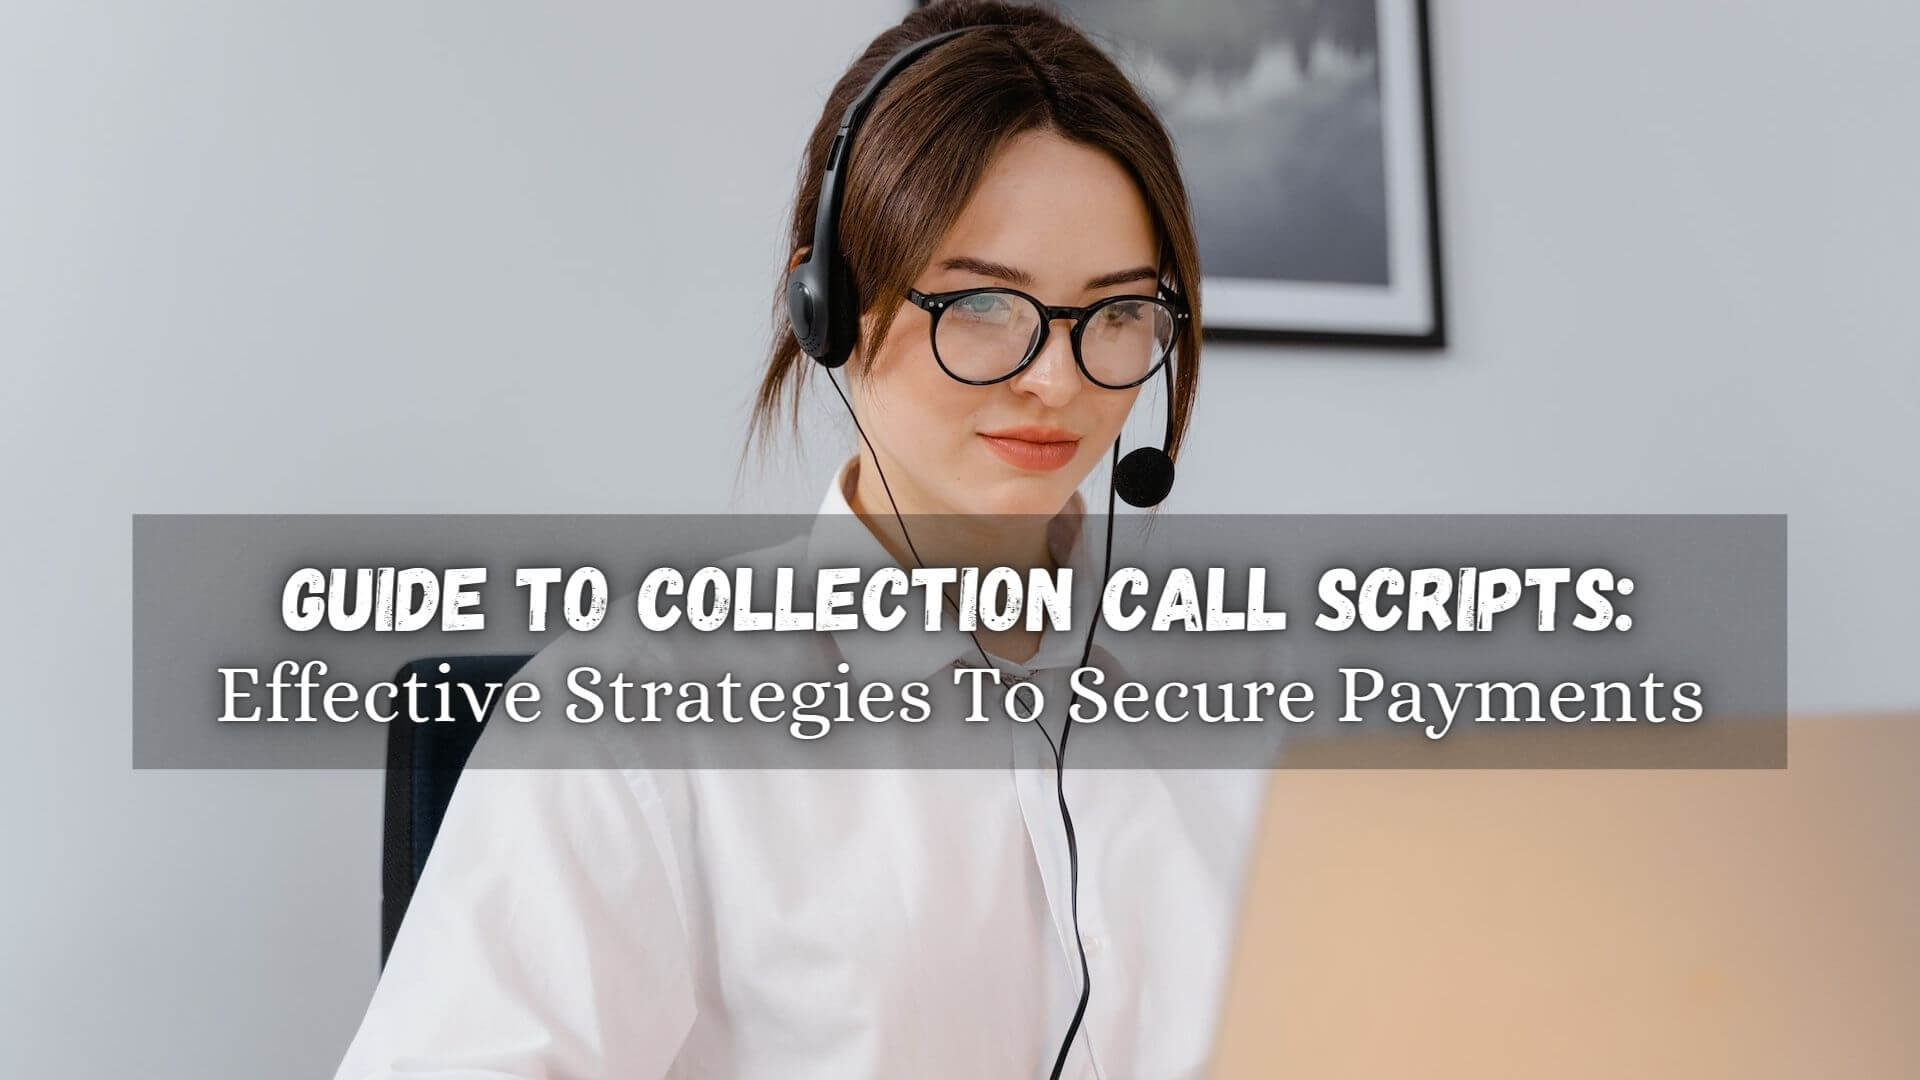 A Collection Call Script is used by debt collection agents to conduct an effective and compliant conversation with debtors. Learn more!